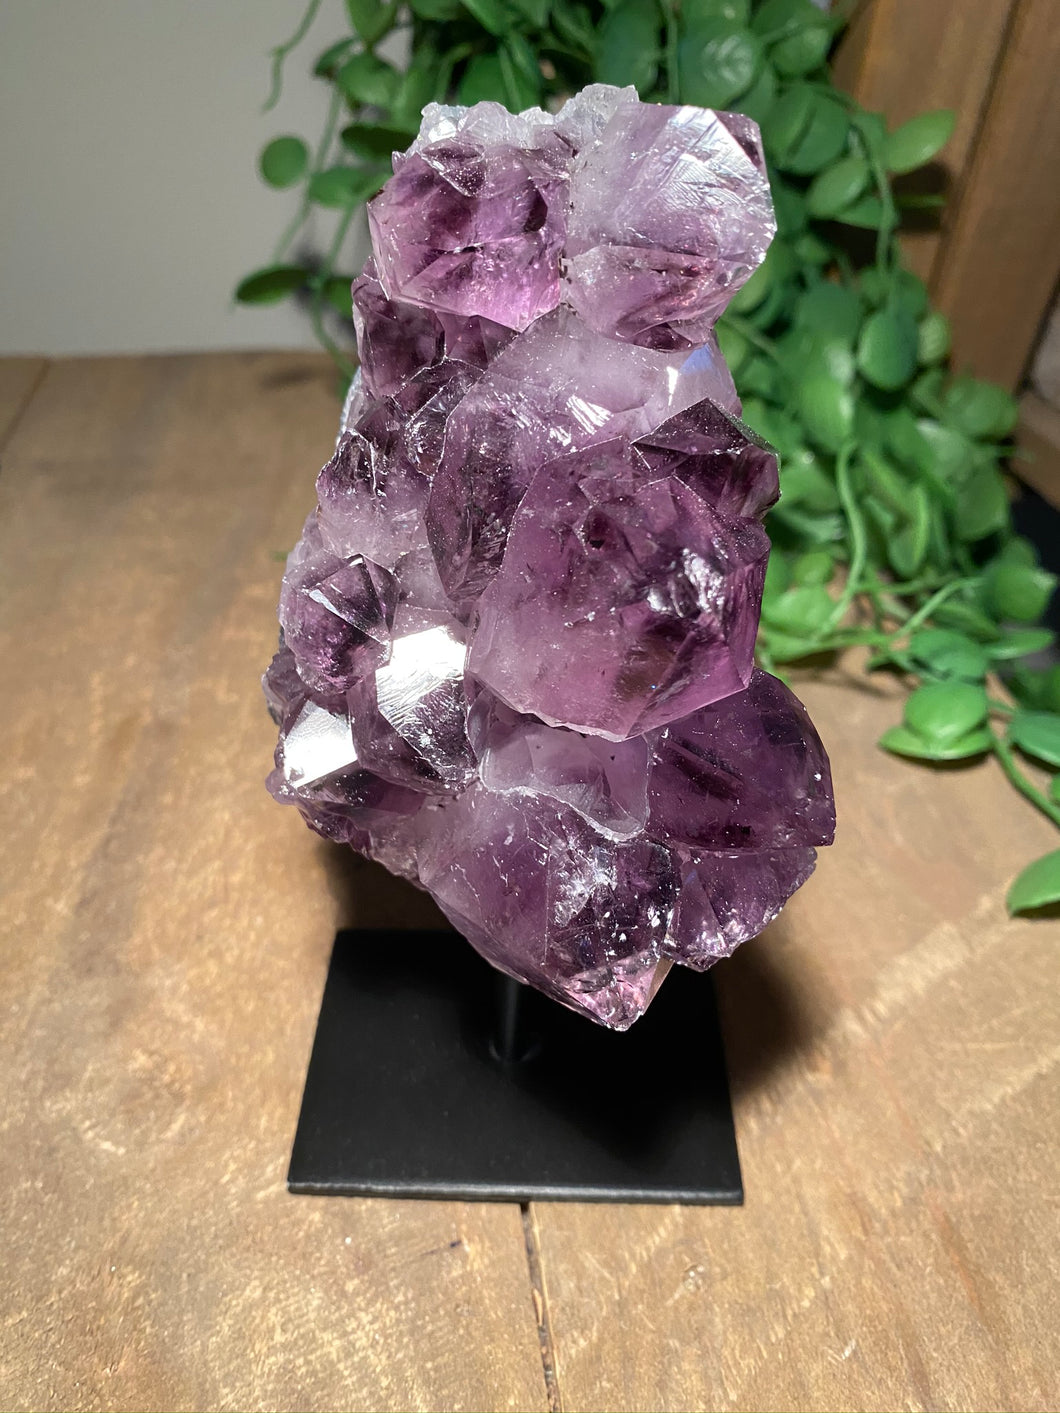 Natural Amethyst Crystal on black display stand -  home décor or unique table piece